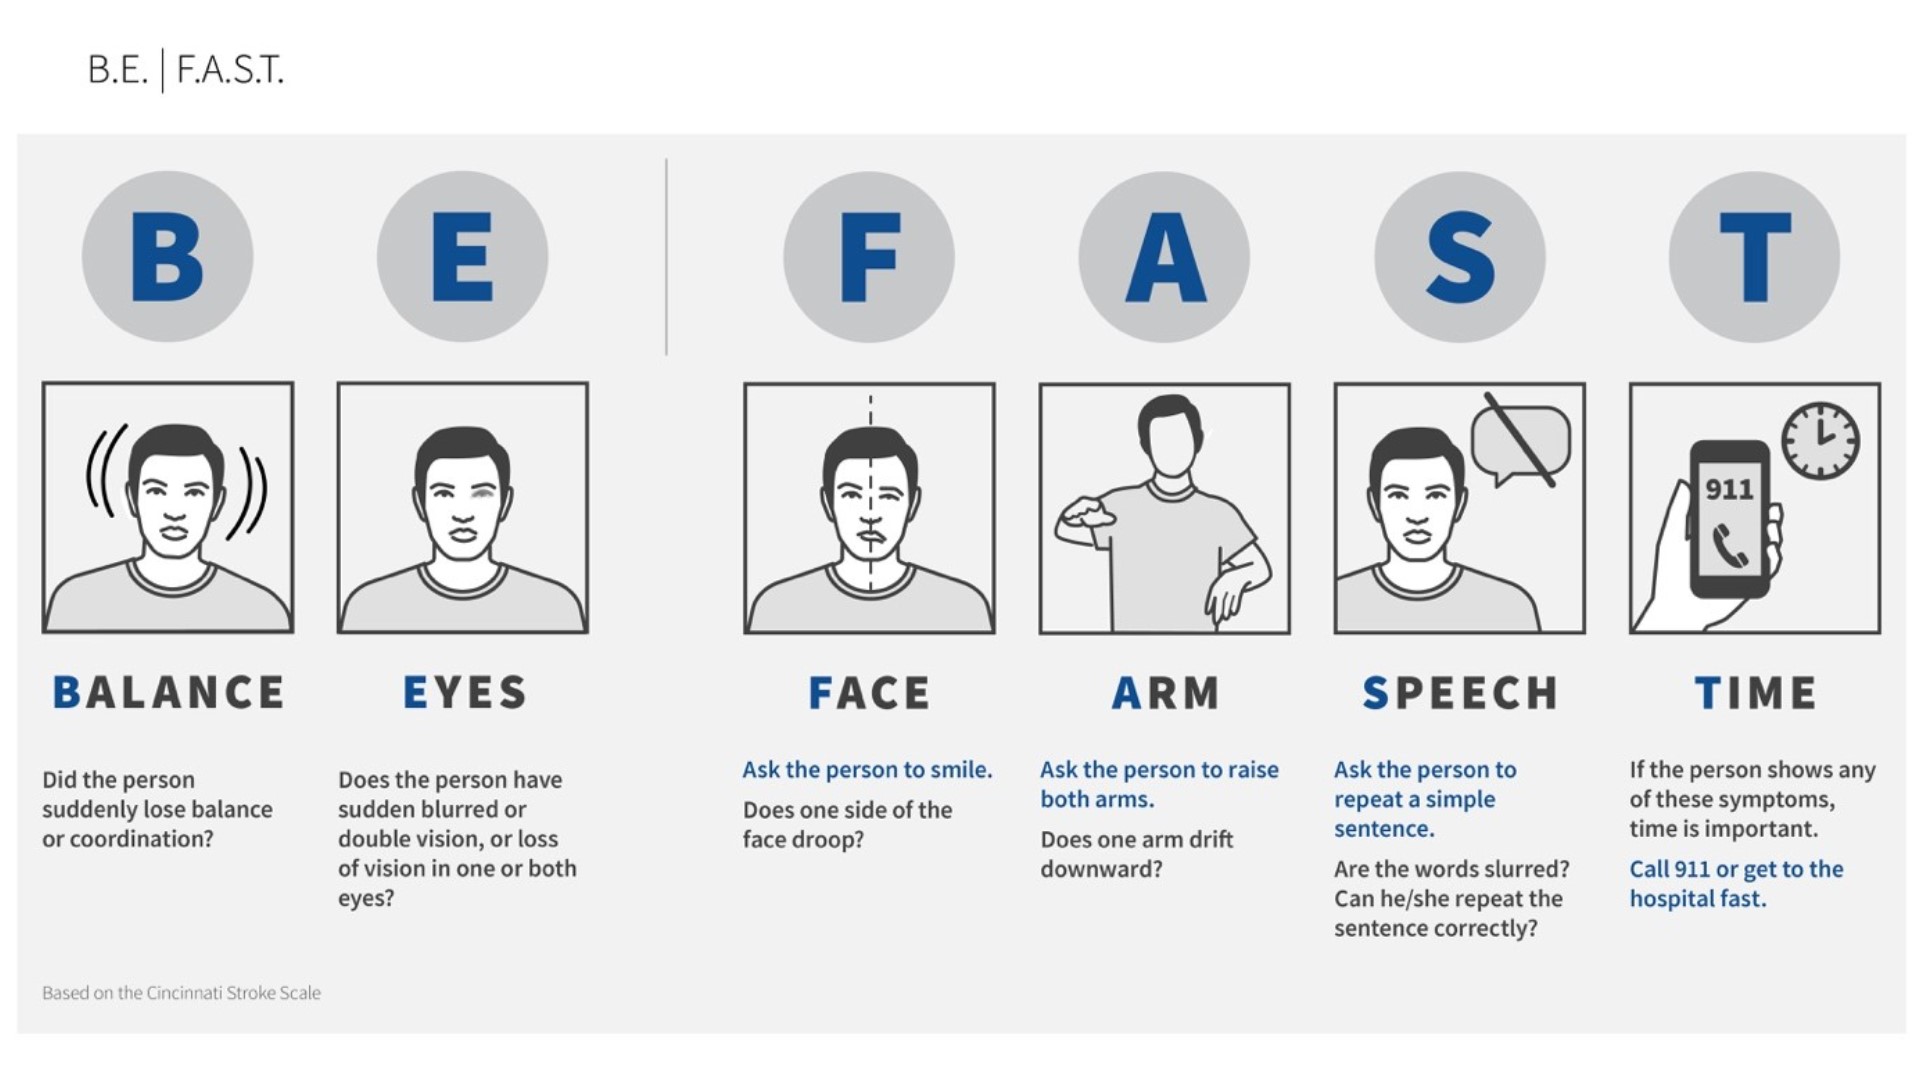 B.E.F.A.S.T. Balance, Eyes, Face, Arms, Speech, Time. Noticing these signs could help save someone from a stroke.